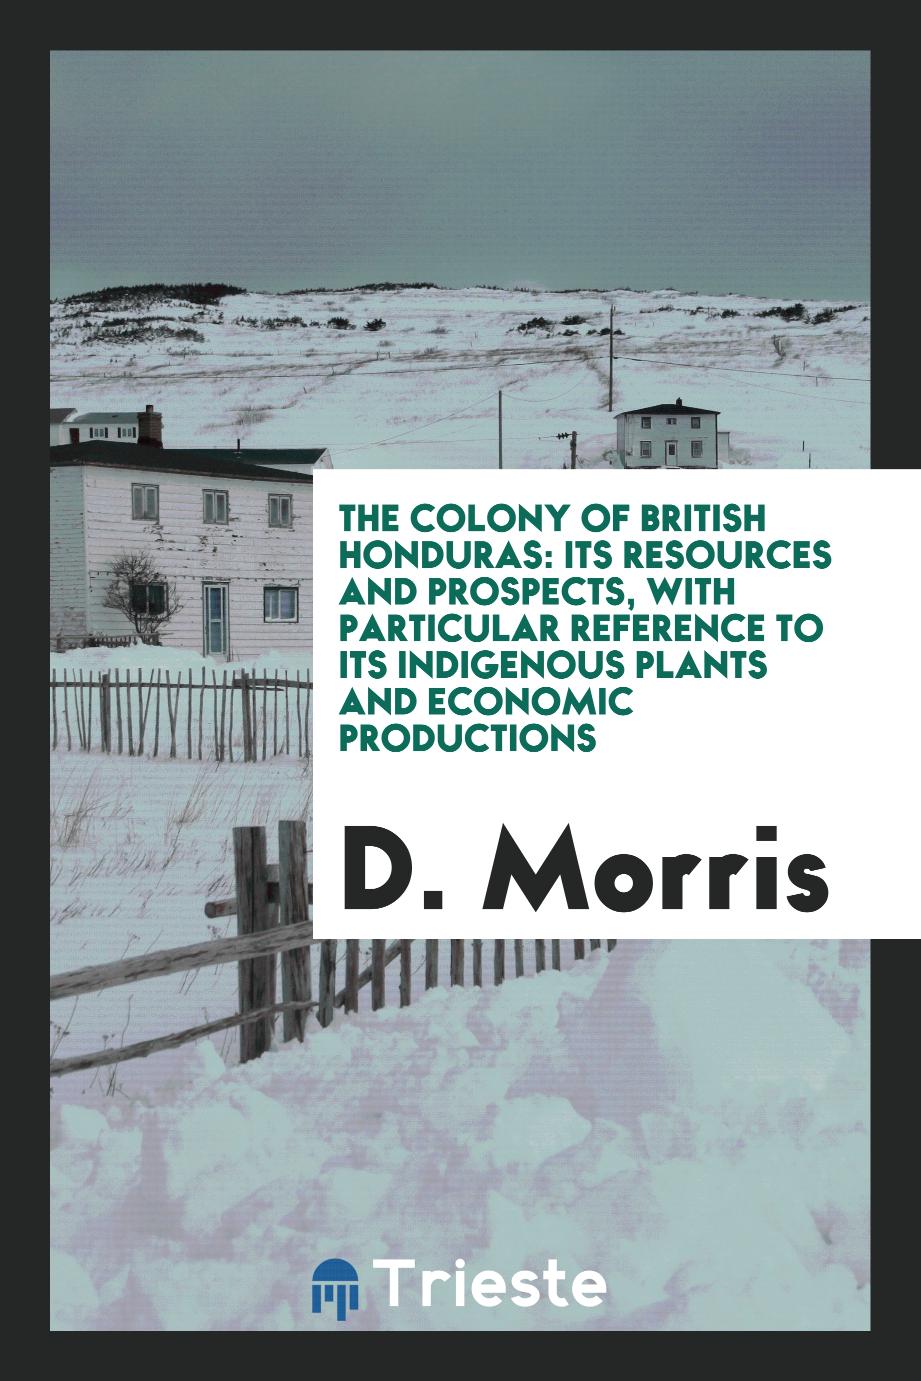 The Colony of British Honduras: Its Resources and Prospects, with Particular Reference to Its Indigenous Plants and Economic Productions